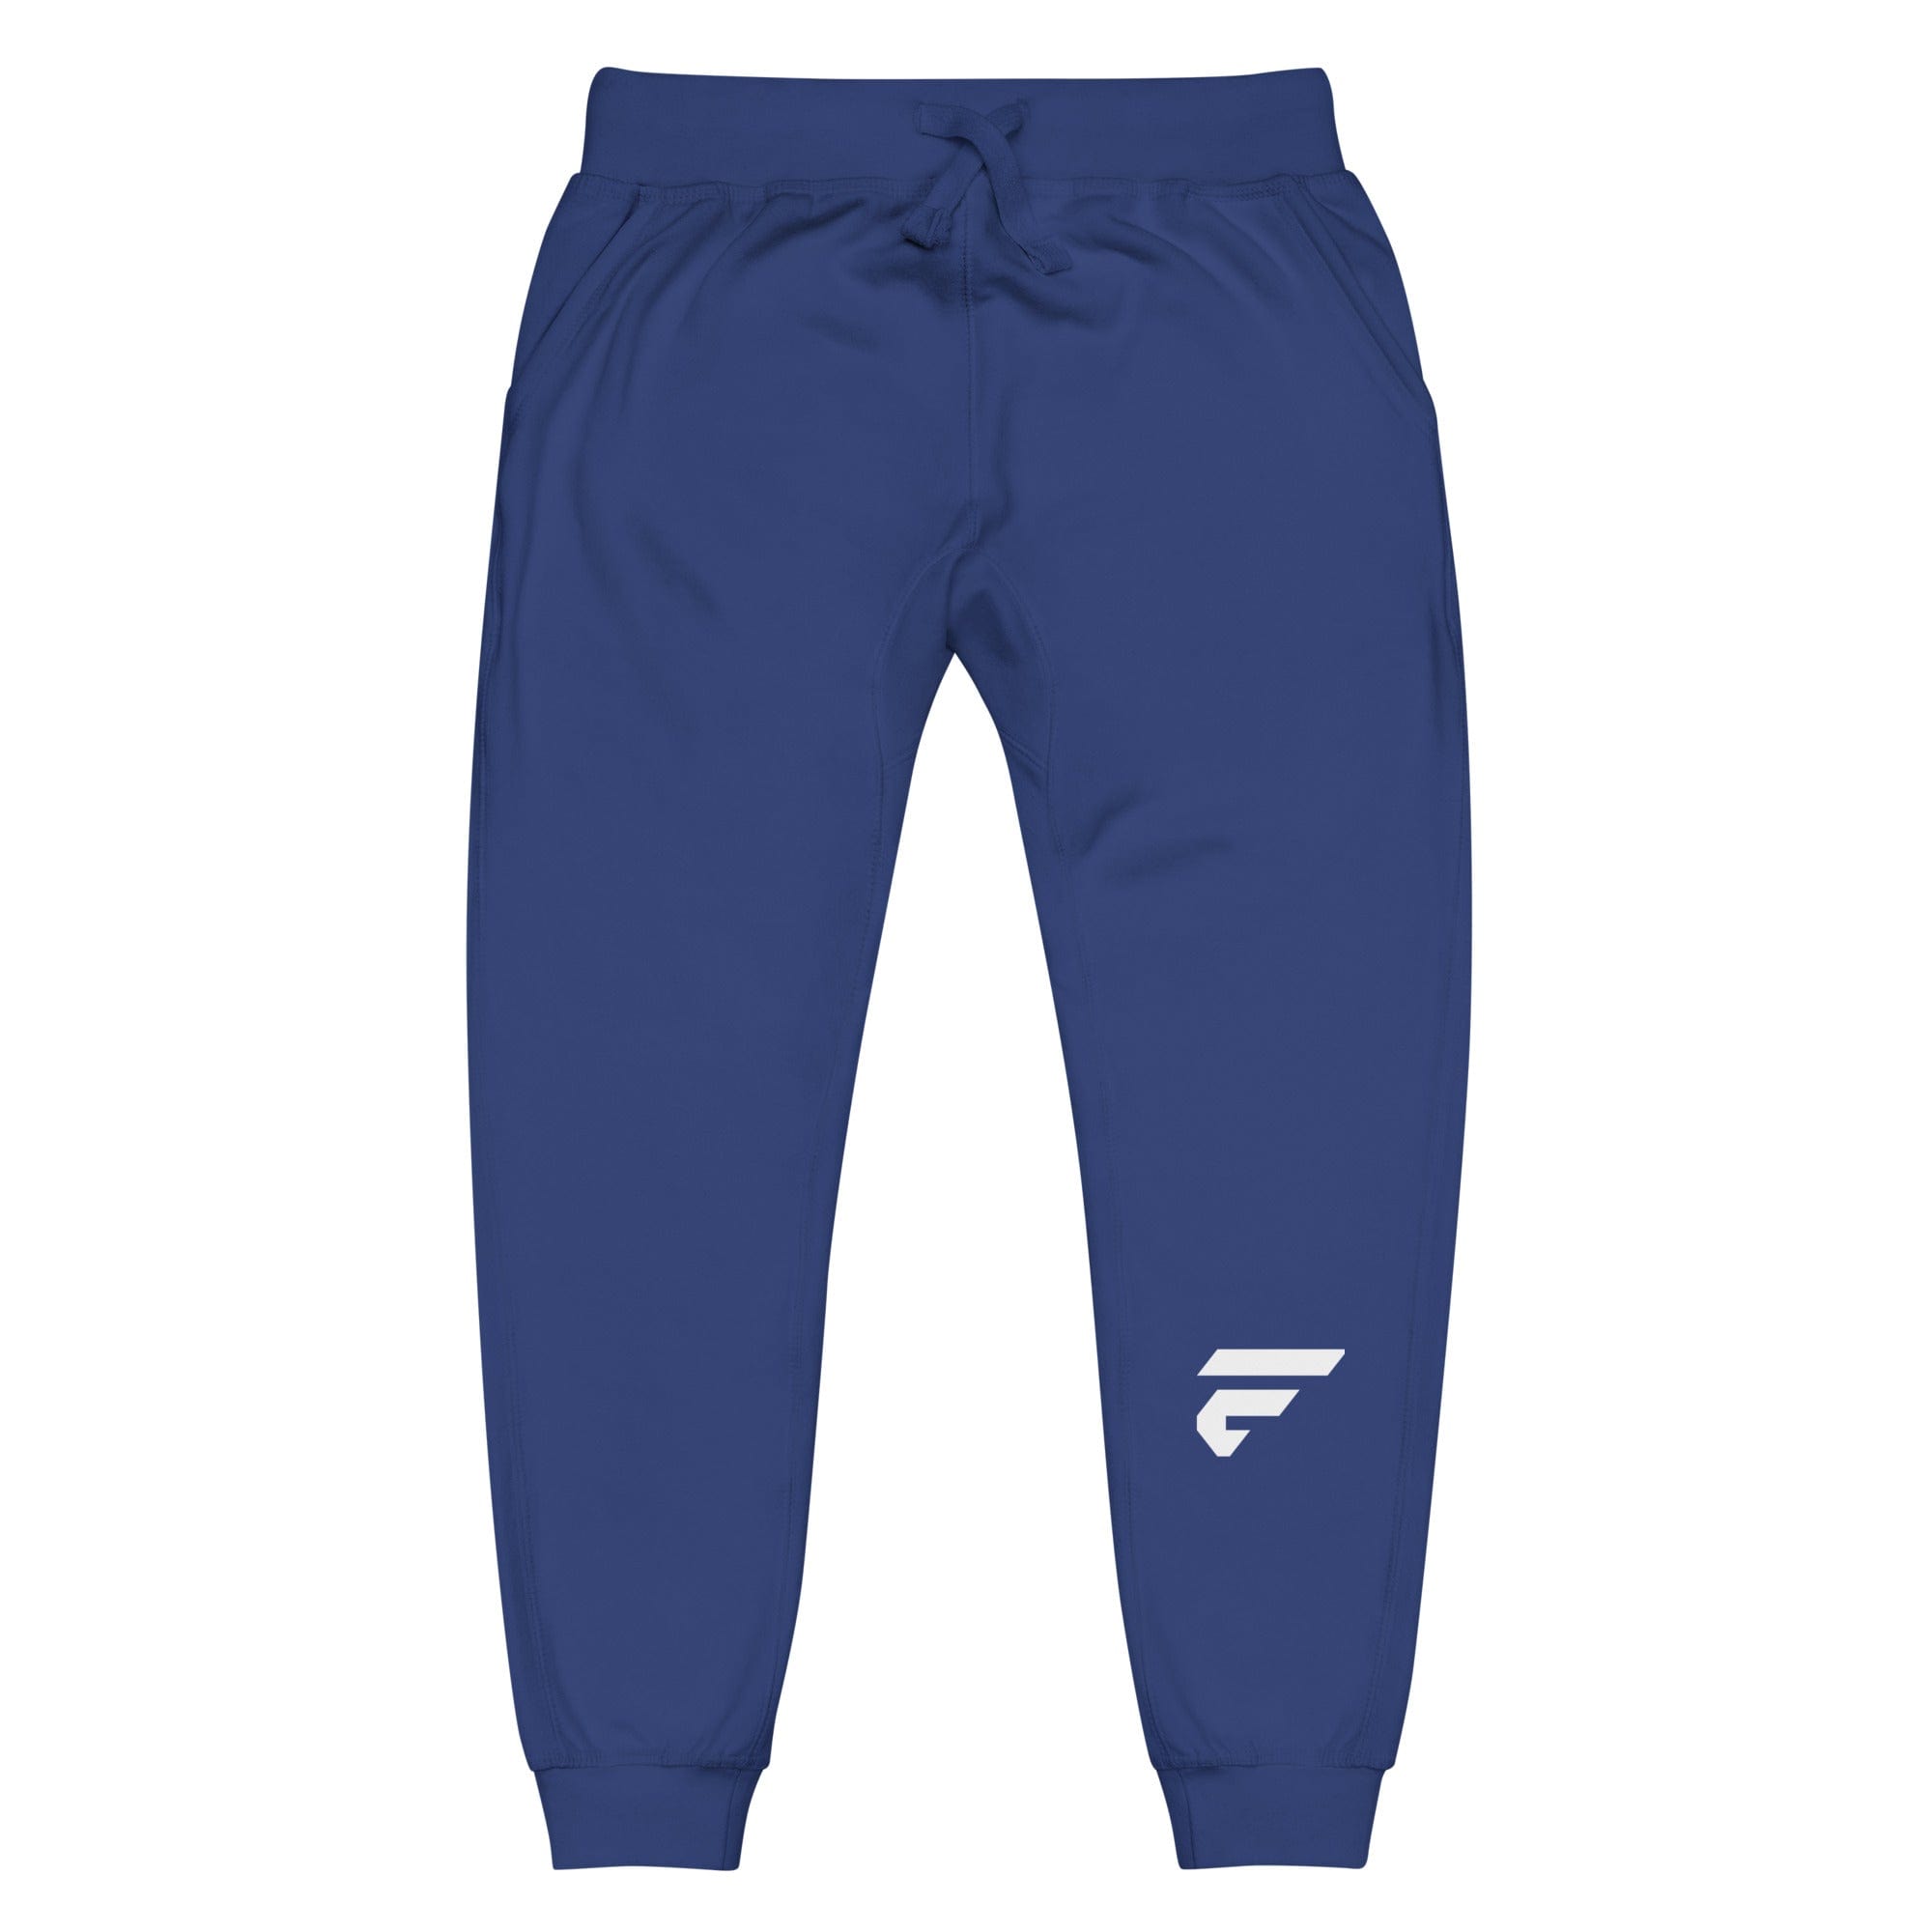 Blue unisex joggers with Fire Cornhole F logo in white